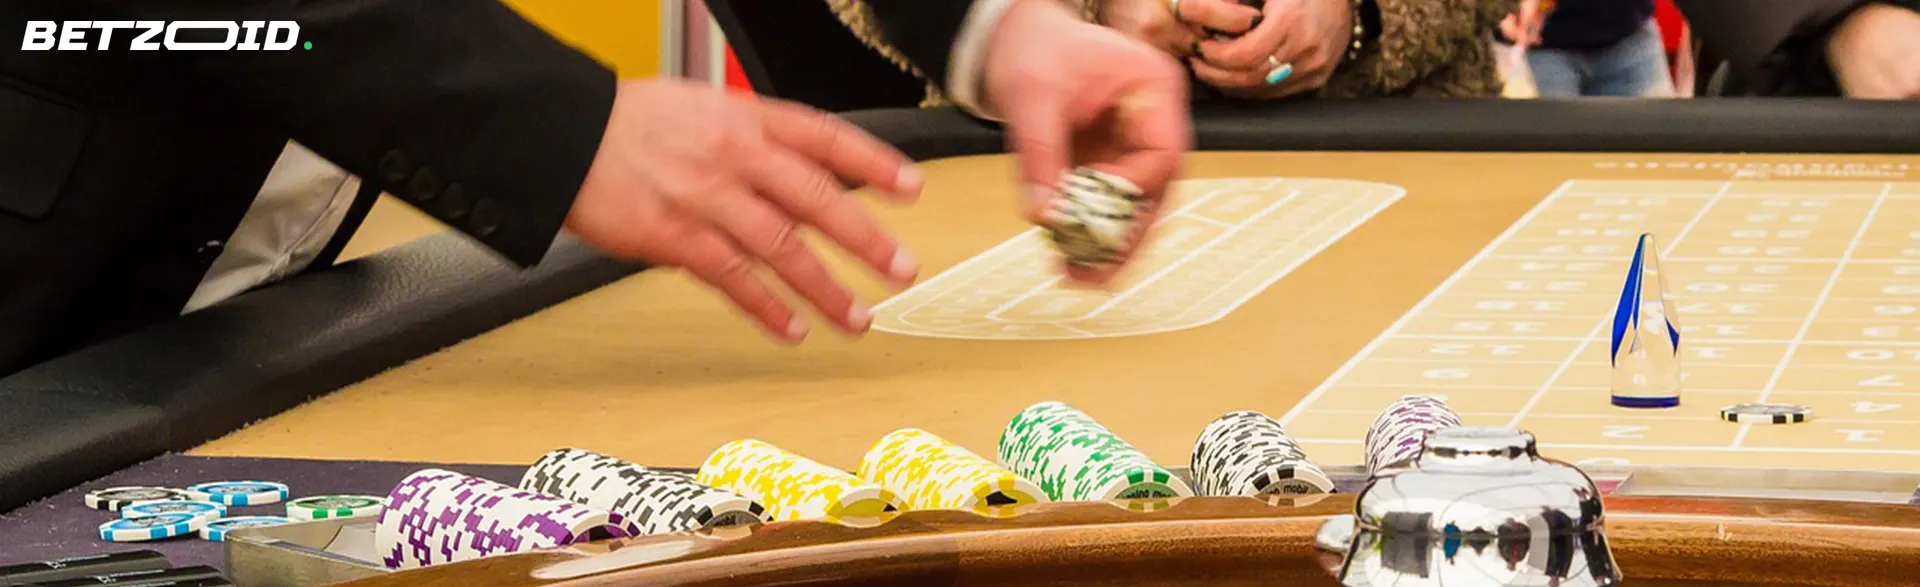 Players placing bets at a casino table with chips and cards visible, emphasizing the excitement of live casino gaming.